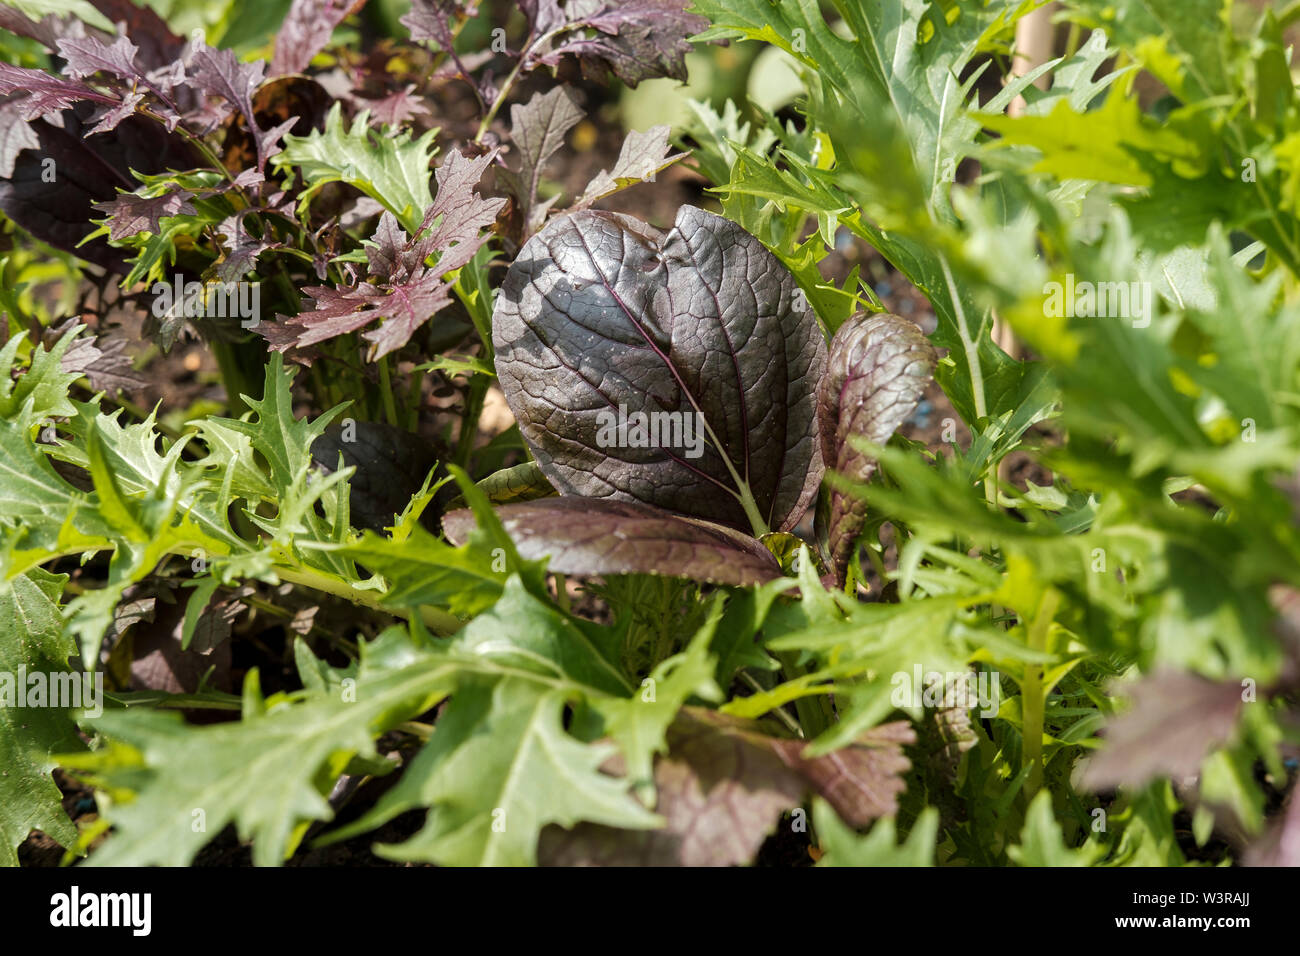 Home garden- young mixed salad leaves Stock Photo